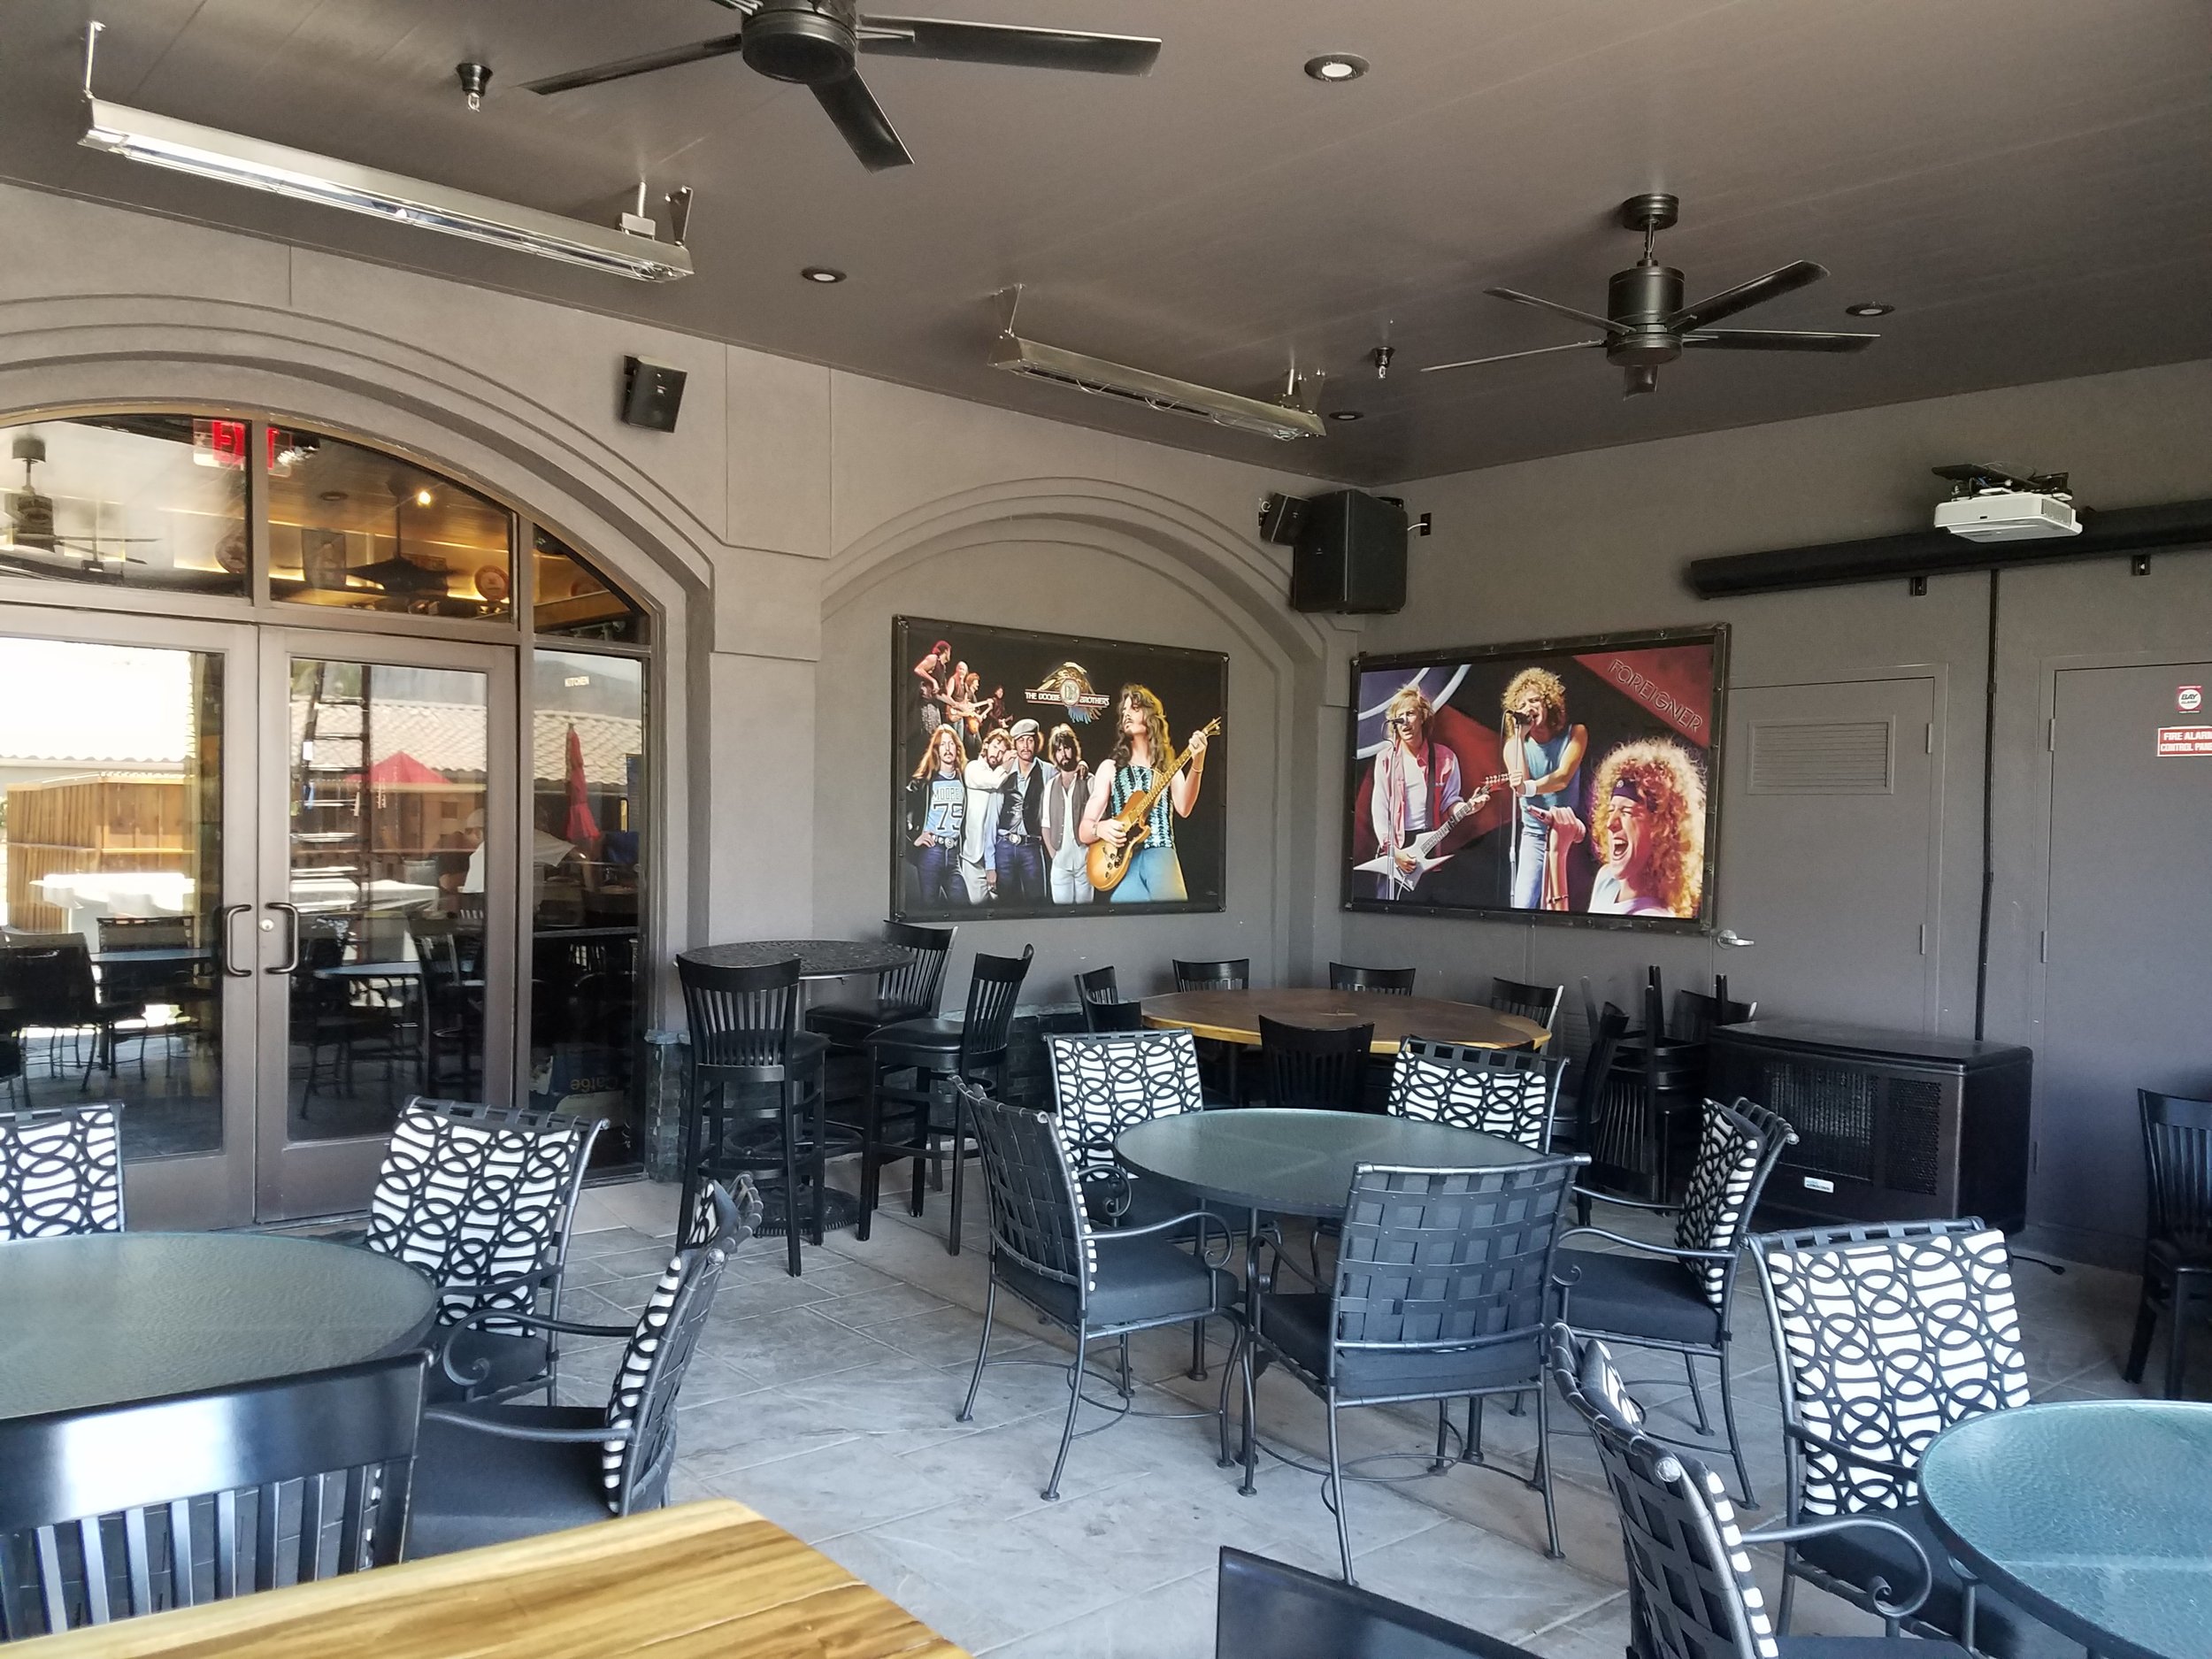 Big Rock Pub - Insulated - Painted Panels - Electric Heaters - Fan - Can Lights.jpg